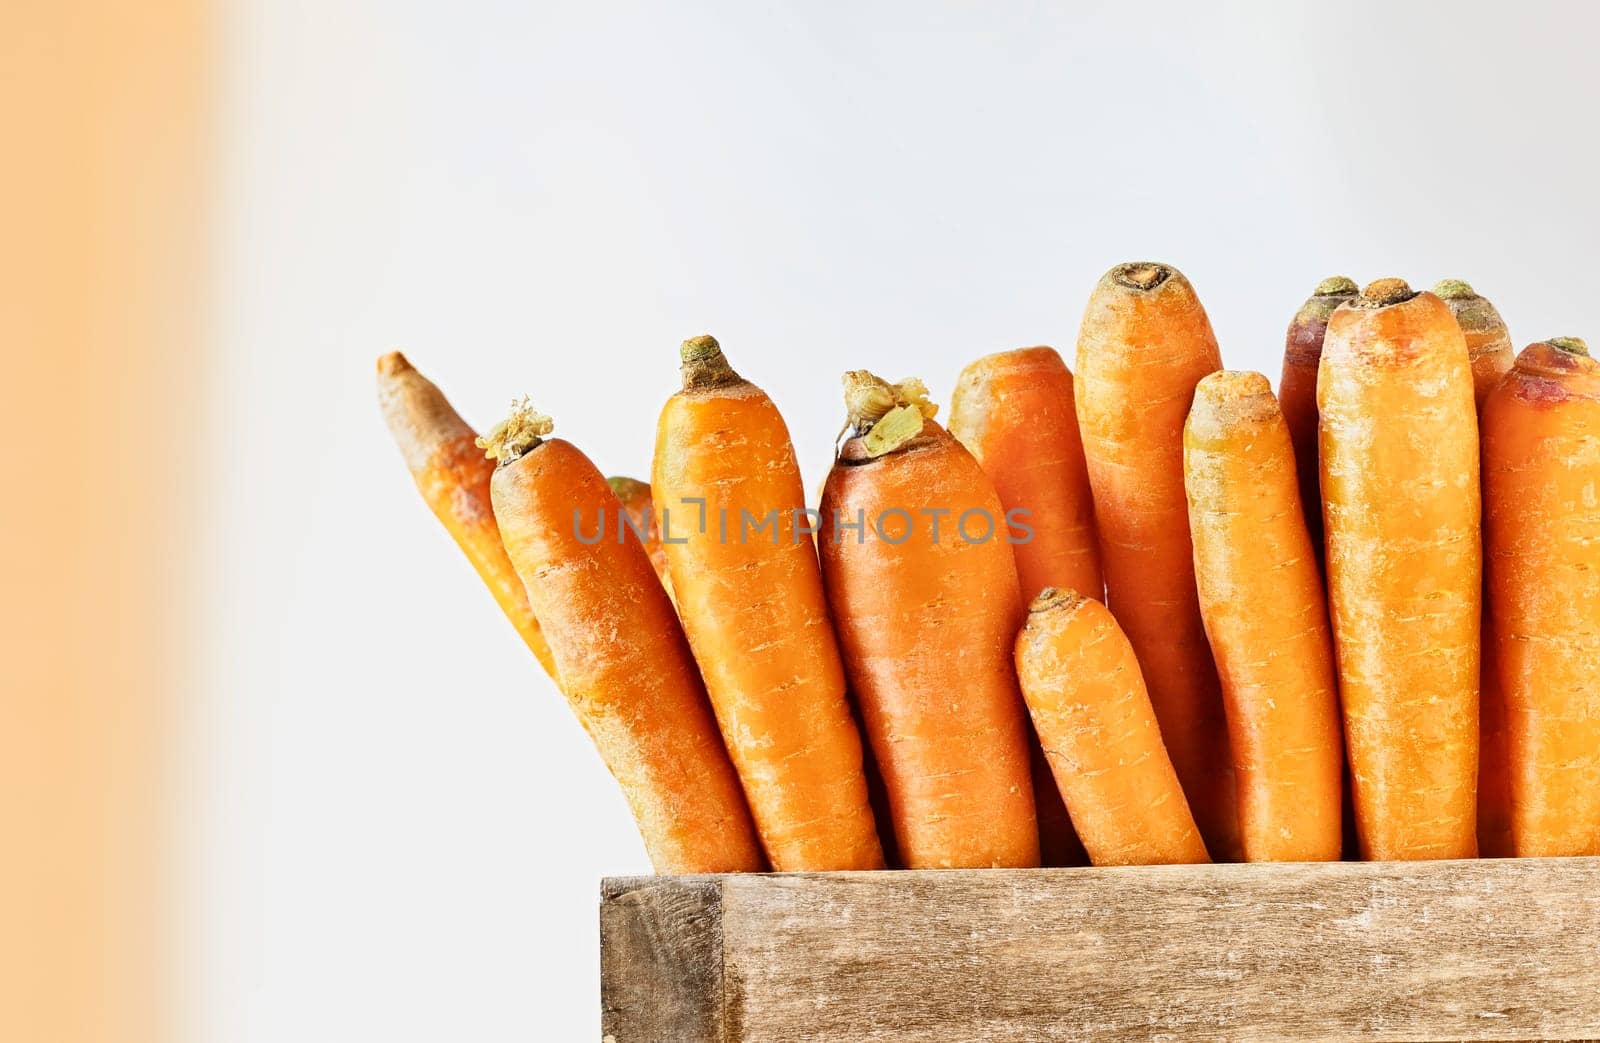 Bunch of orange carrots in wooden box on wooden table ,